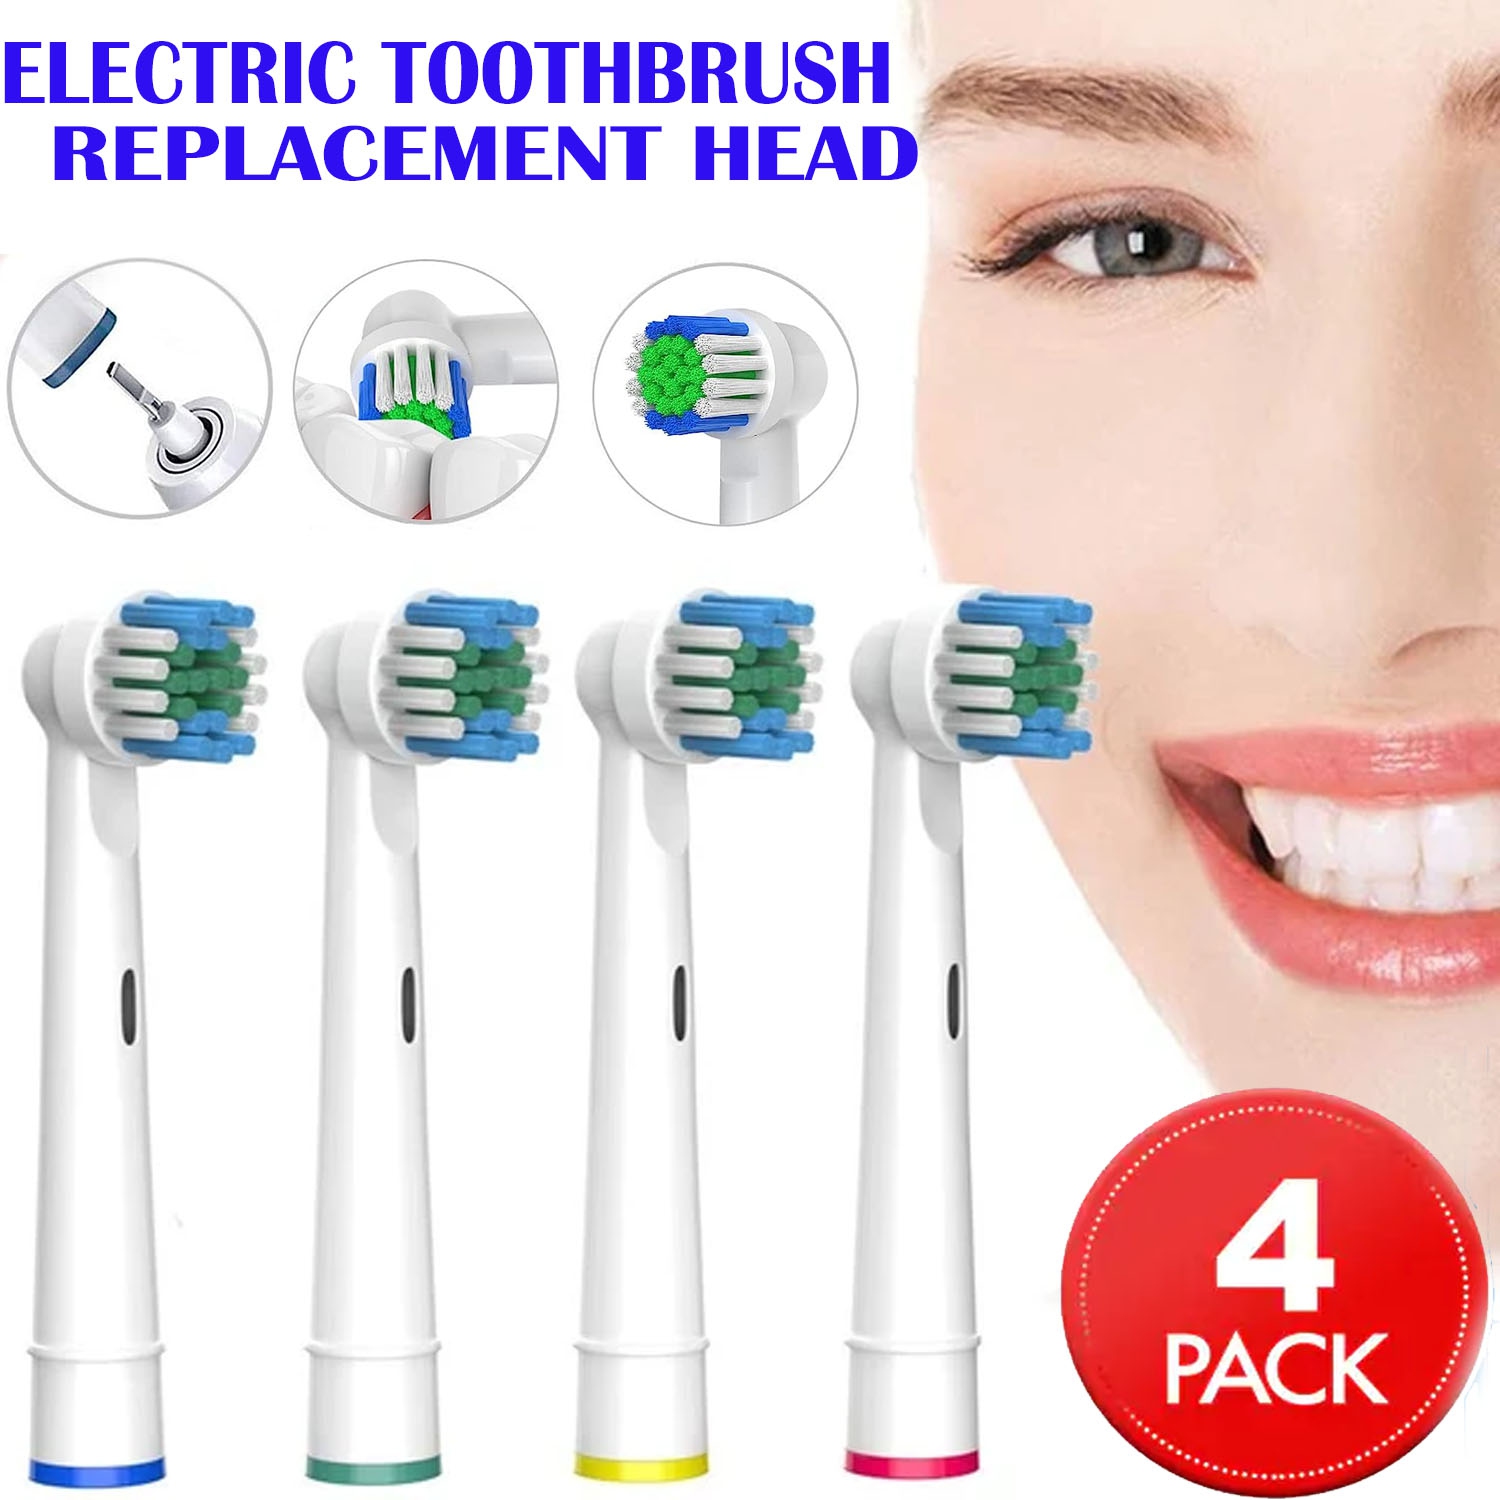 Best Buy: Oral-B Oral-B Triumph Toothbrush with SmartGuide Triumph 9900